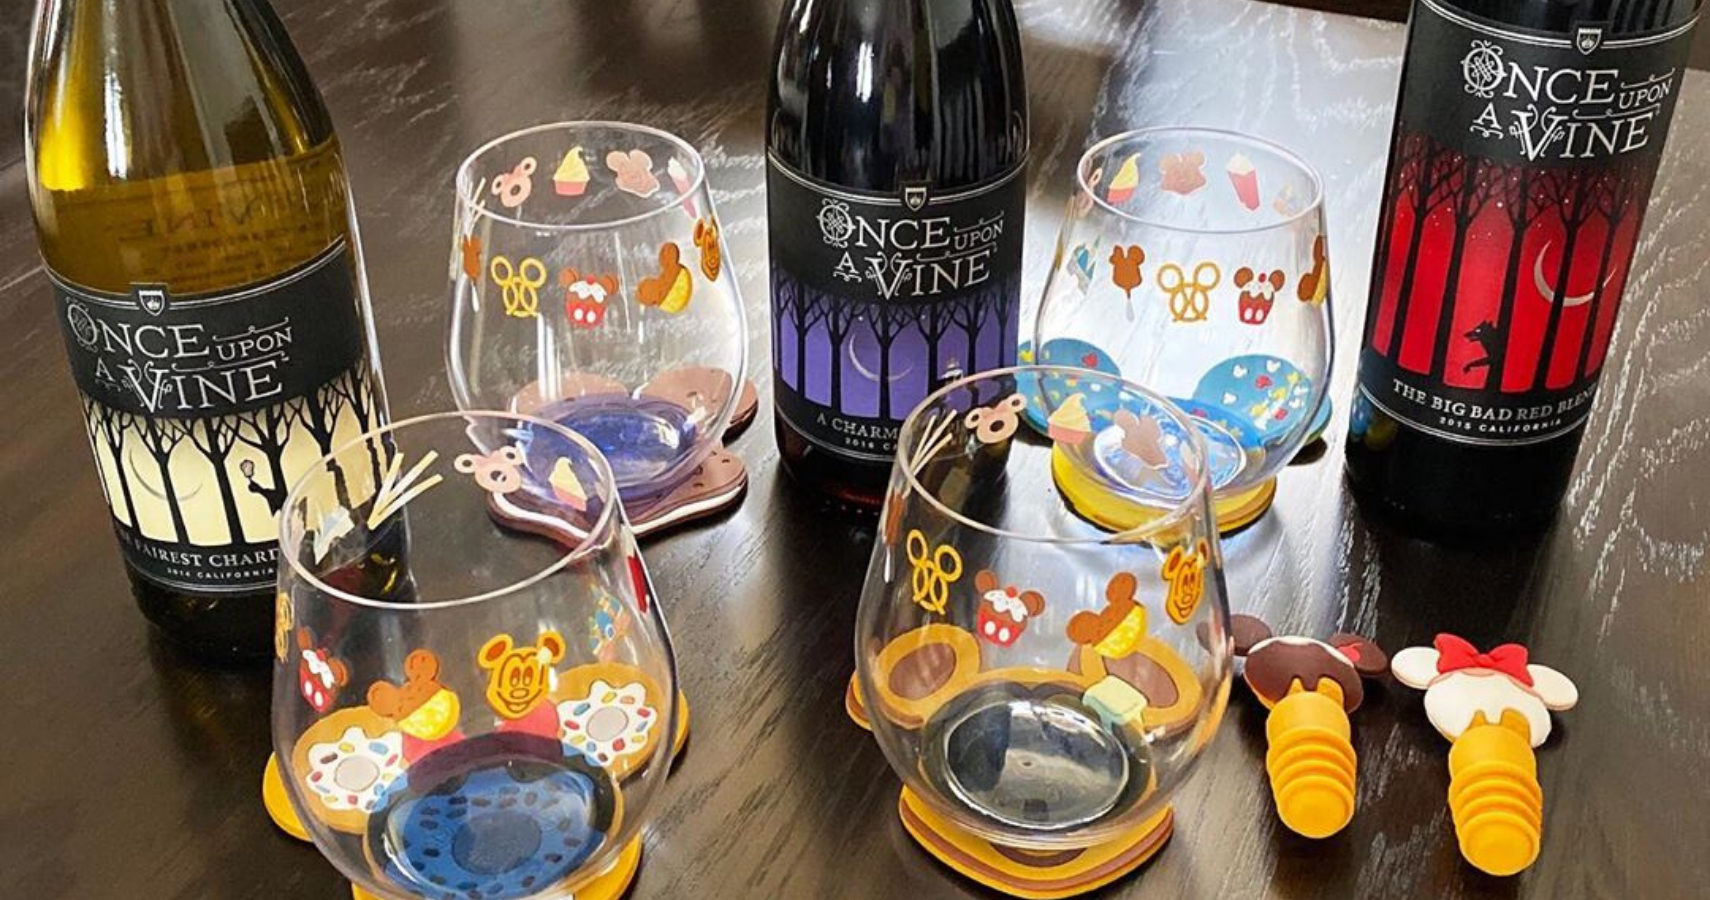 Disney's Wine 'Once Upon A Vine' Available Online